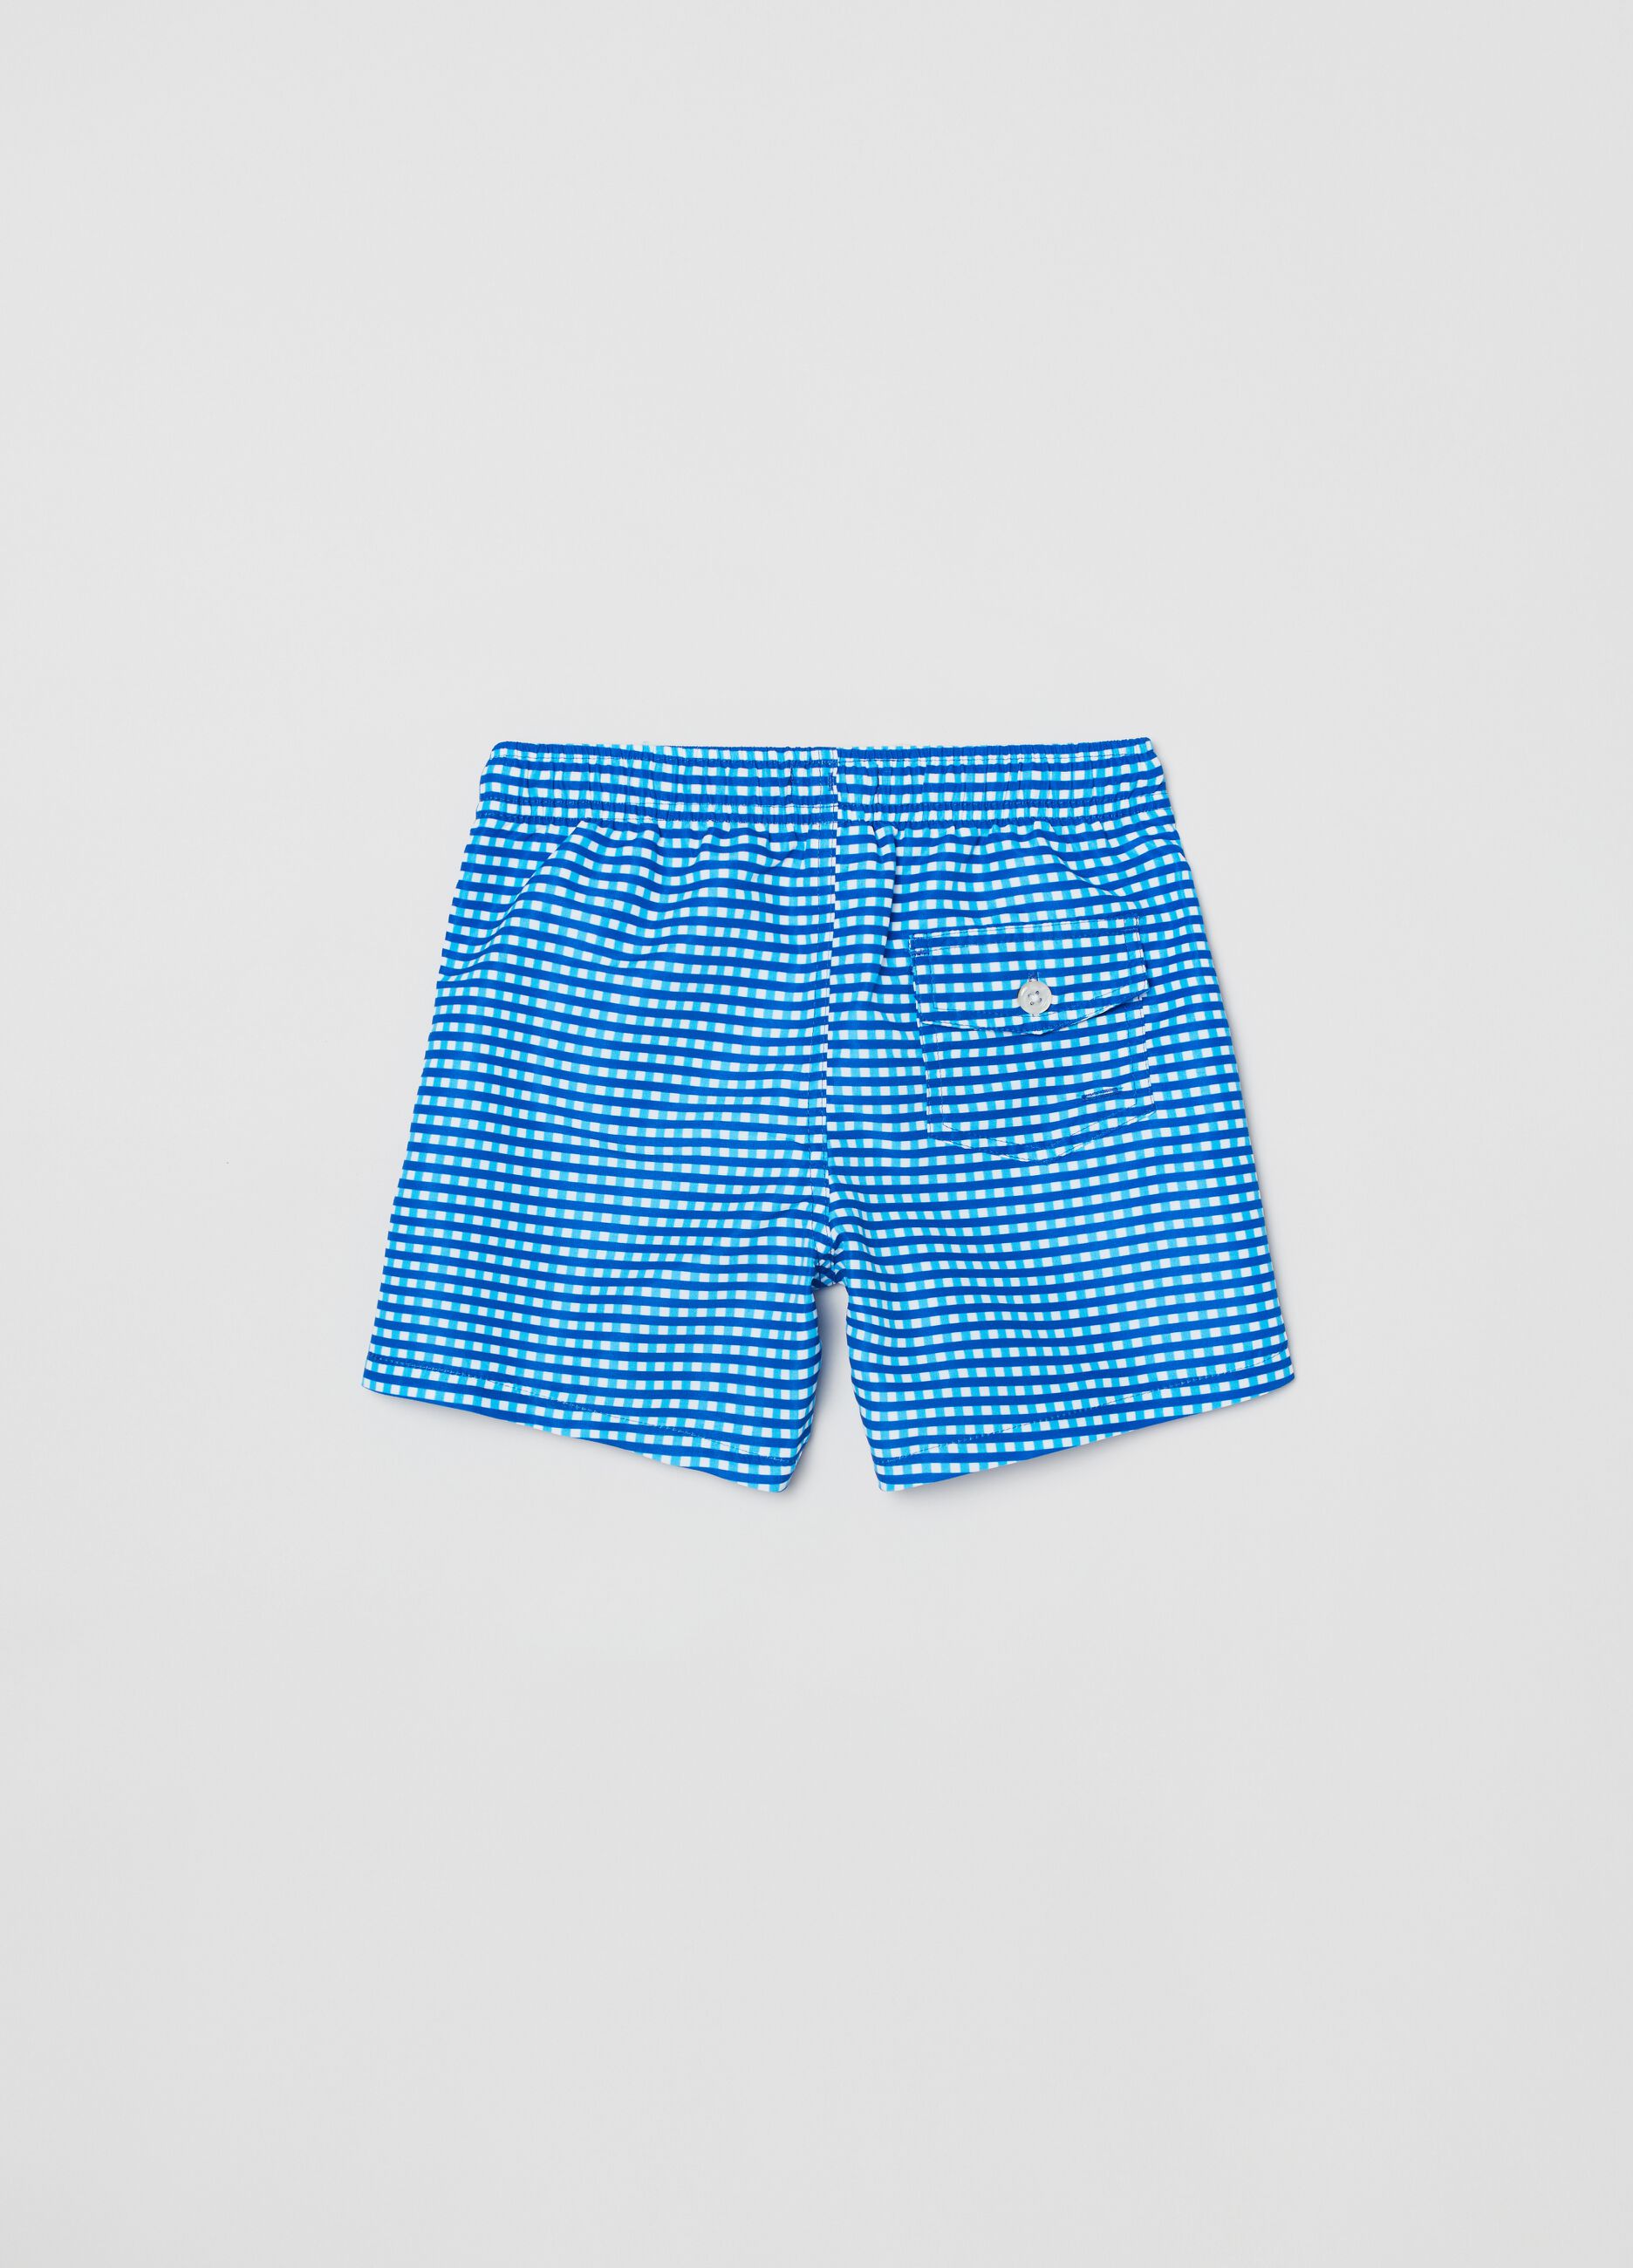 Swimming trunks with gingham pattern